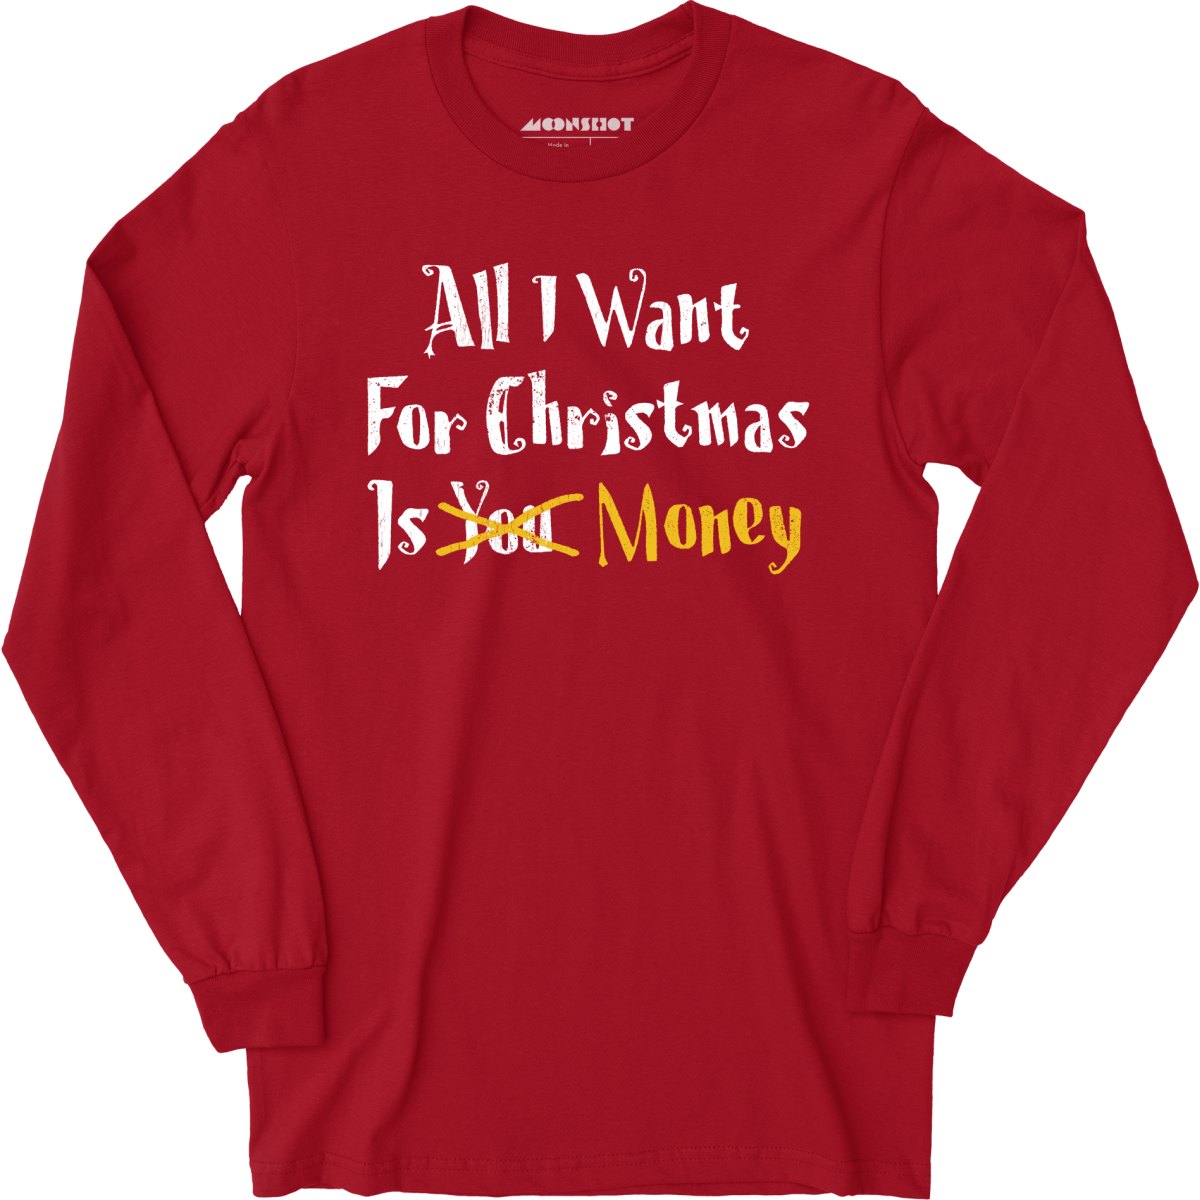 All I Want for Christmas is Money - Long Sleeve T-Shirt